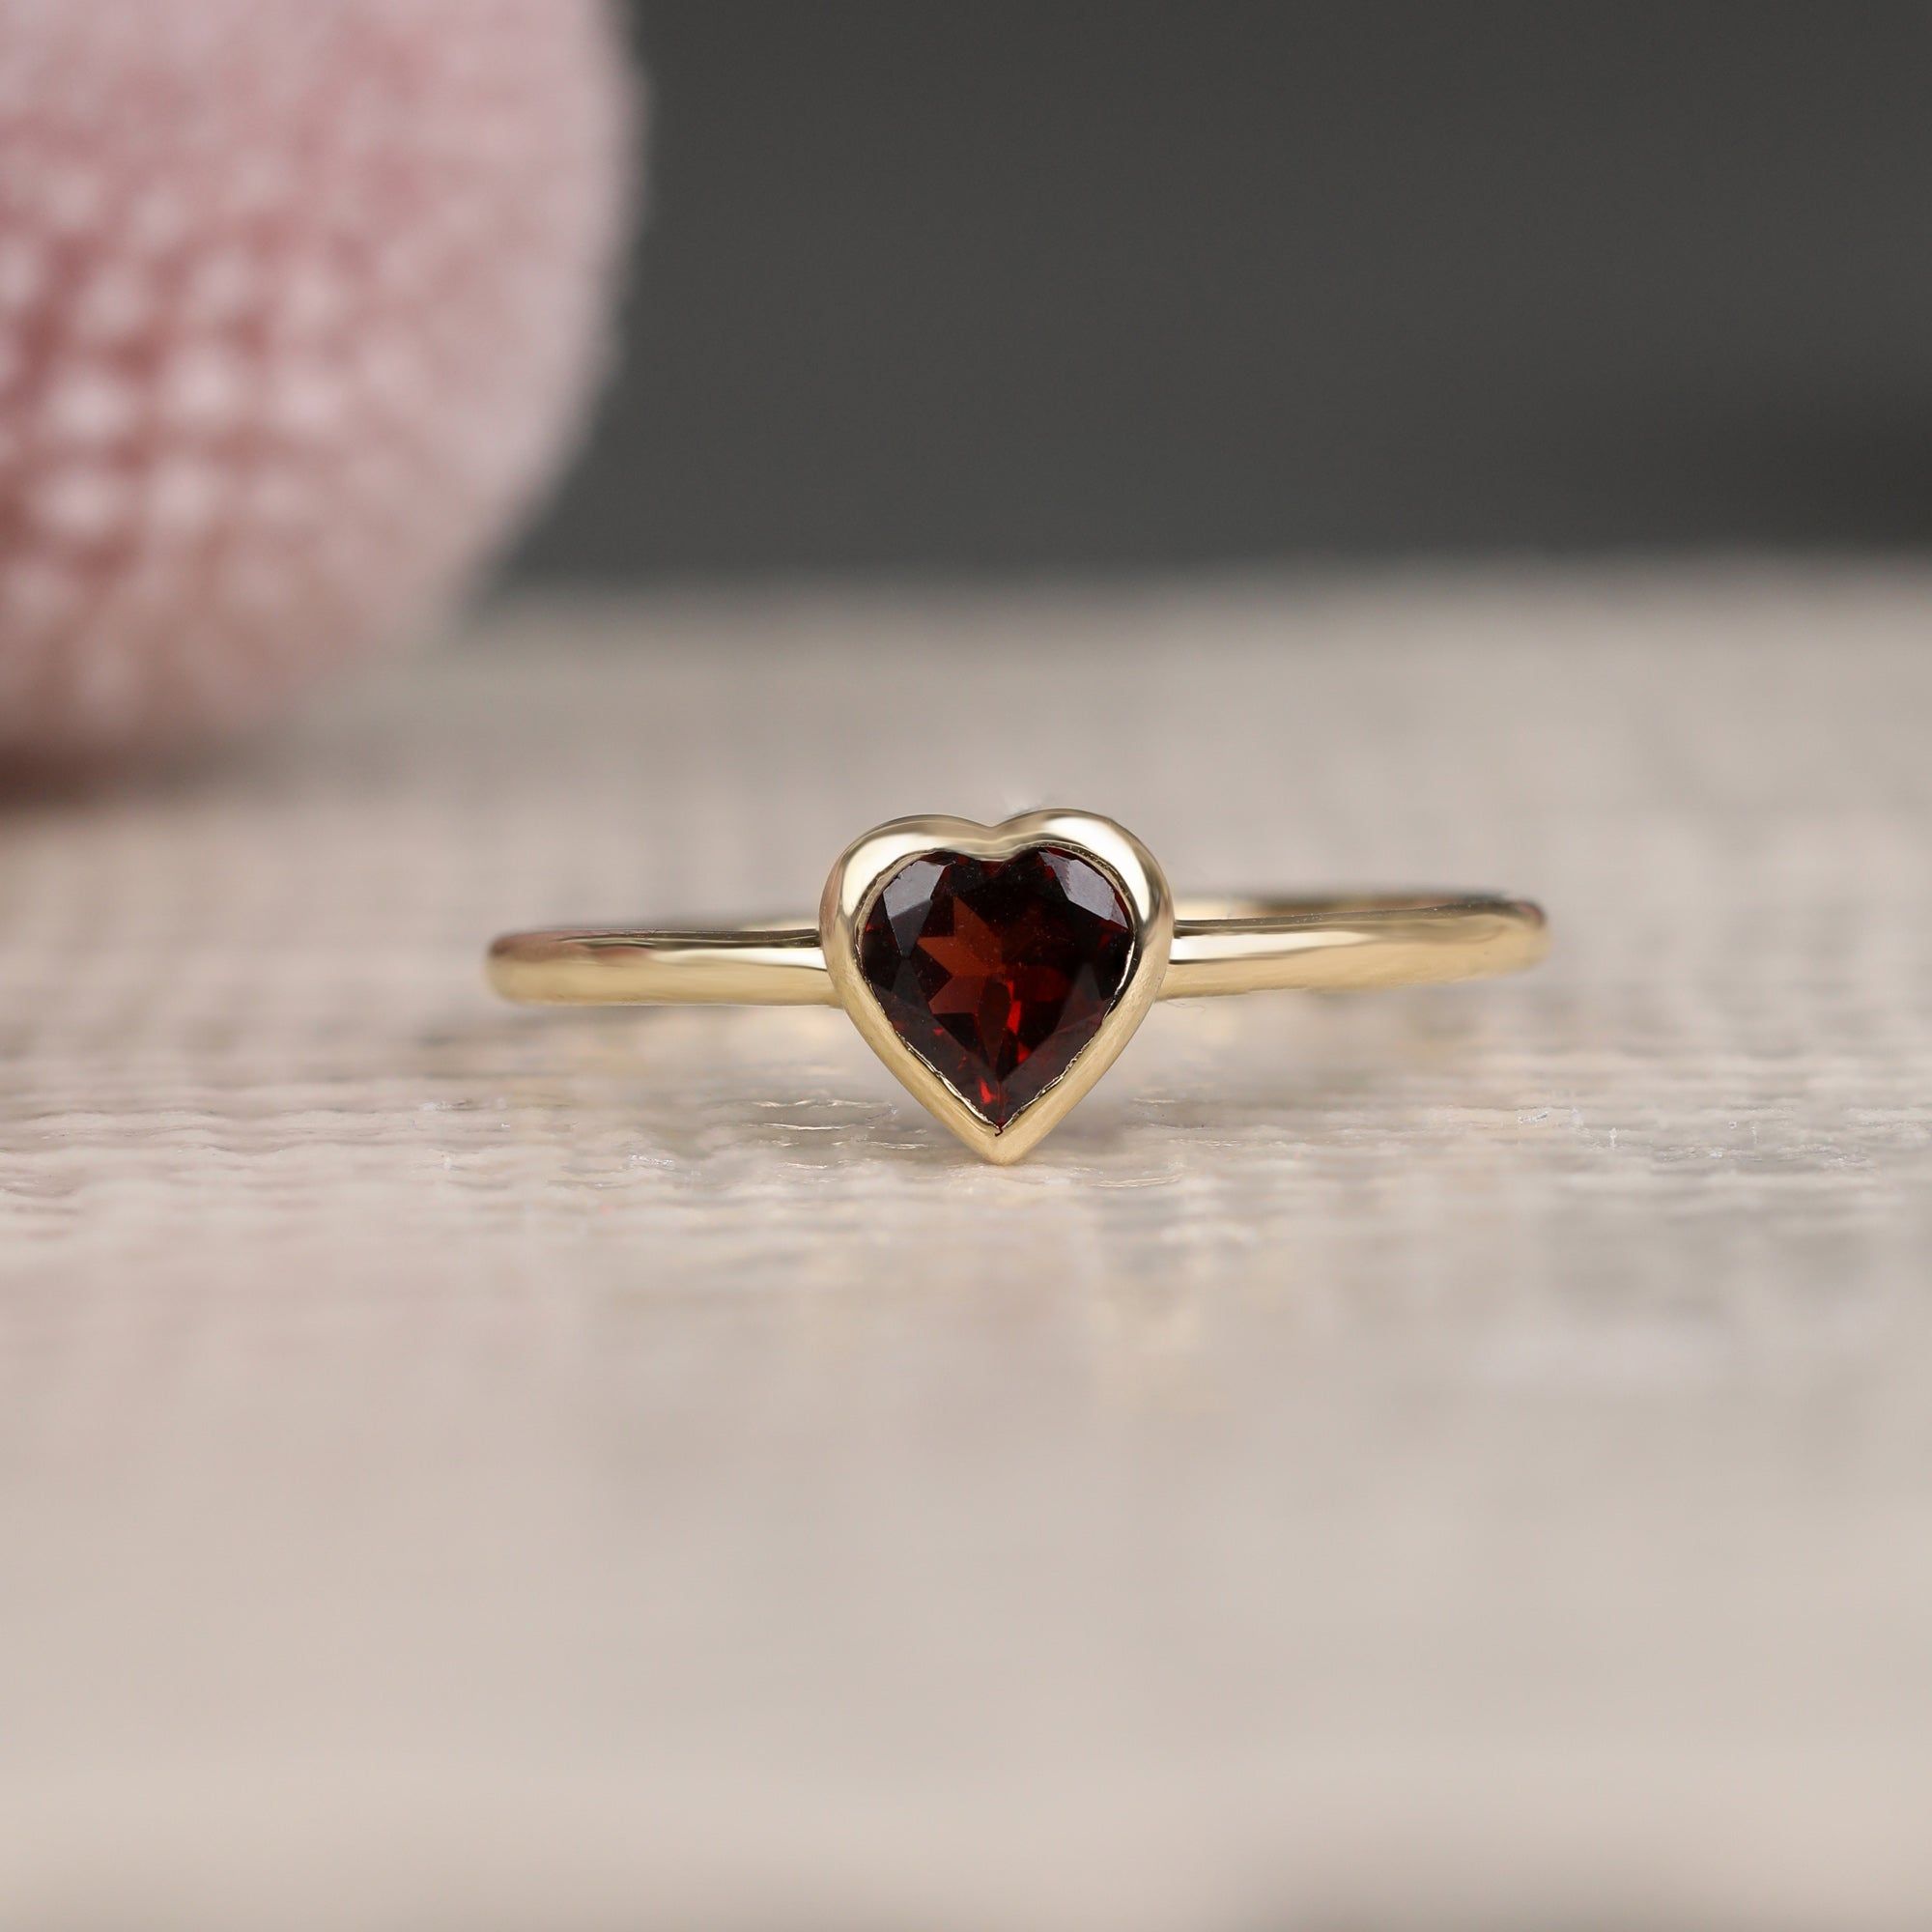 The Symbolism of Heart Rings: Love,
Commitment, and Romance